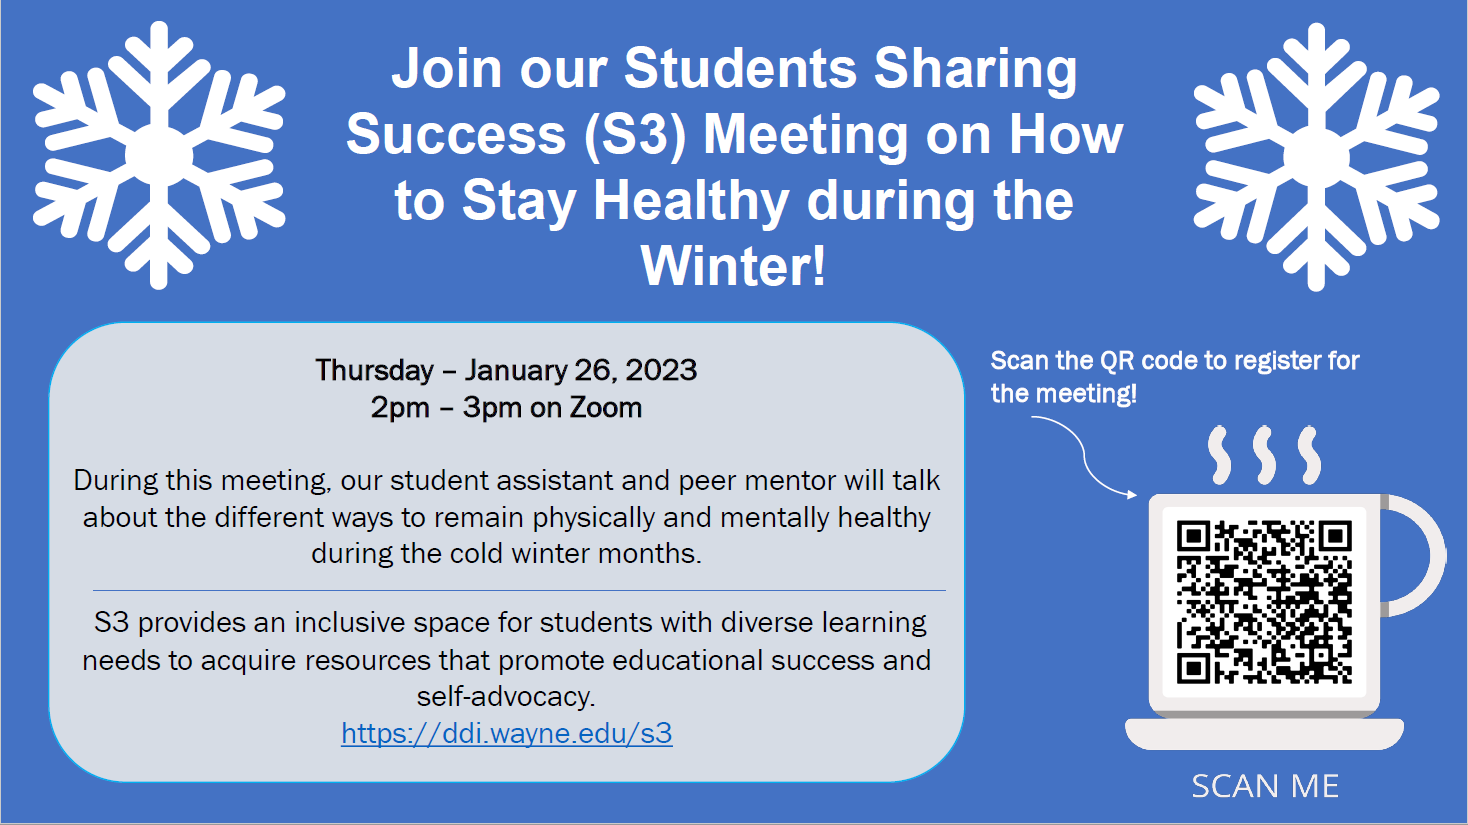 A flyer for the next Students Sharing Success meeting